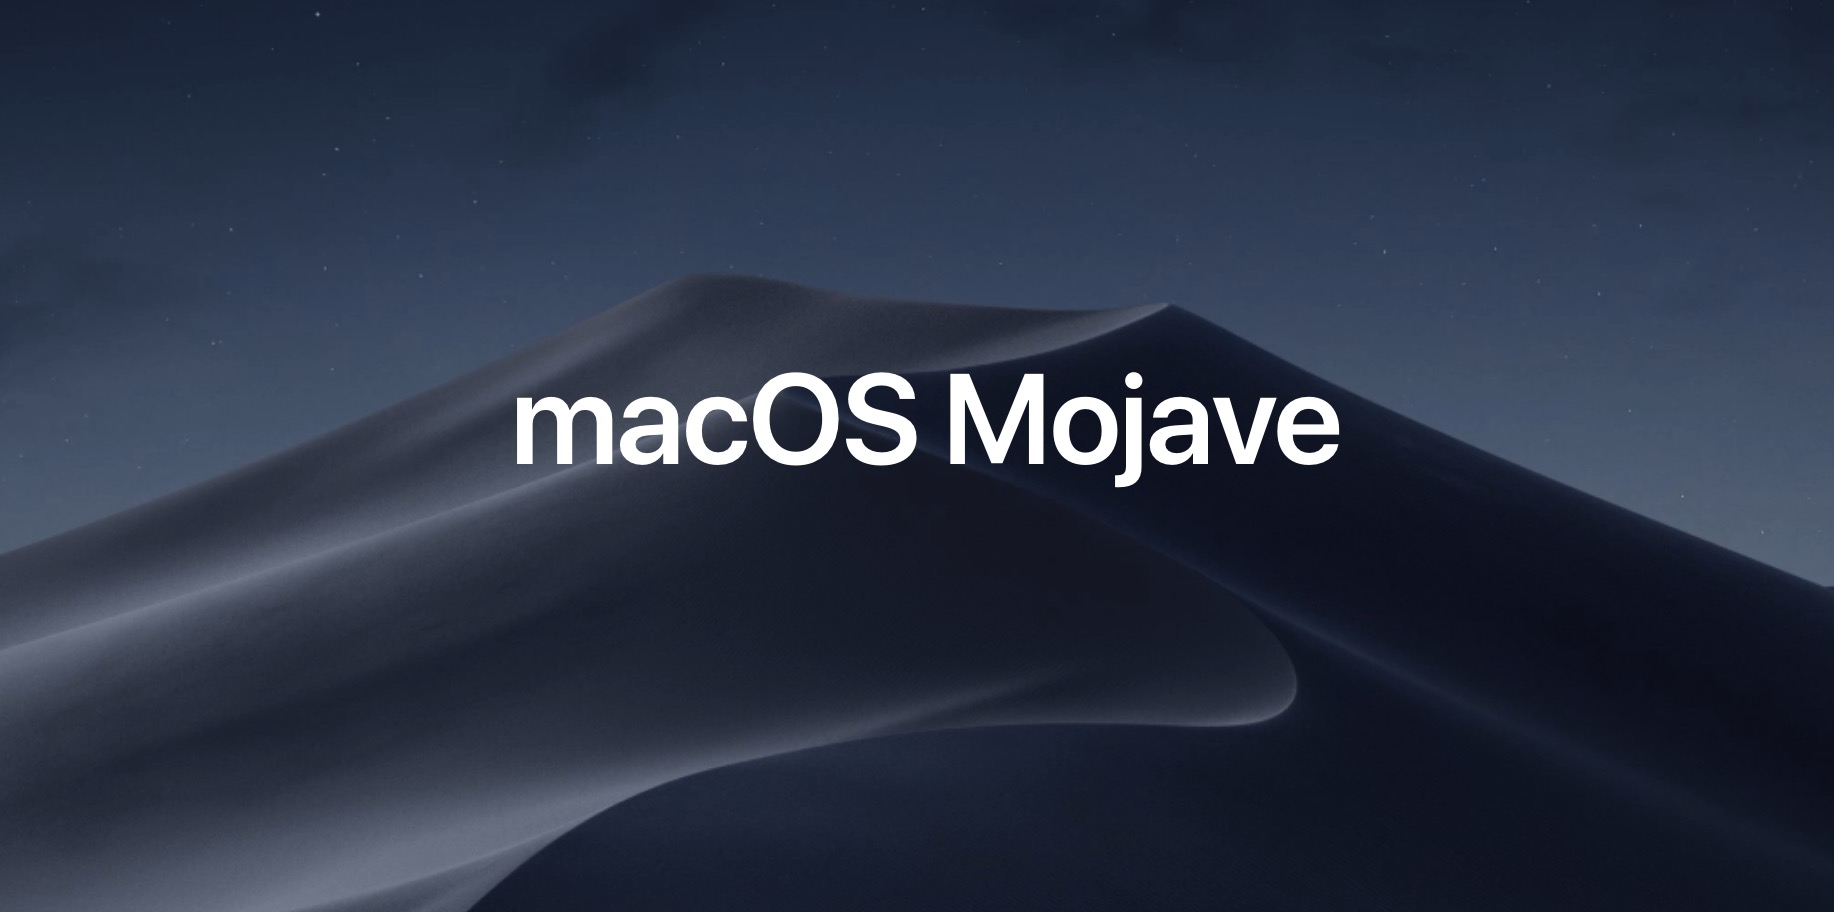 Download macos mojave 10.14 how to download ps3 games for free